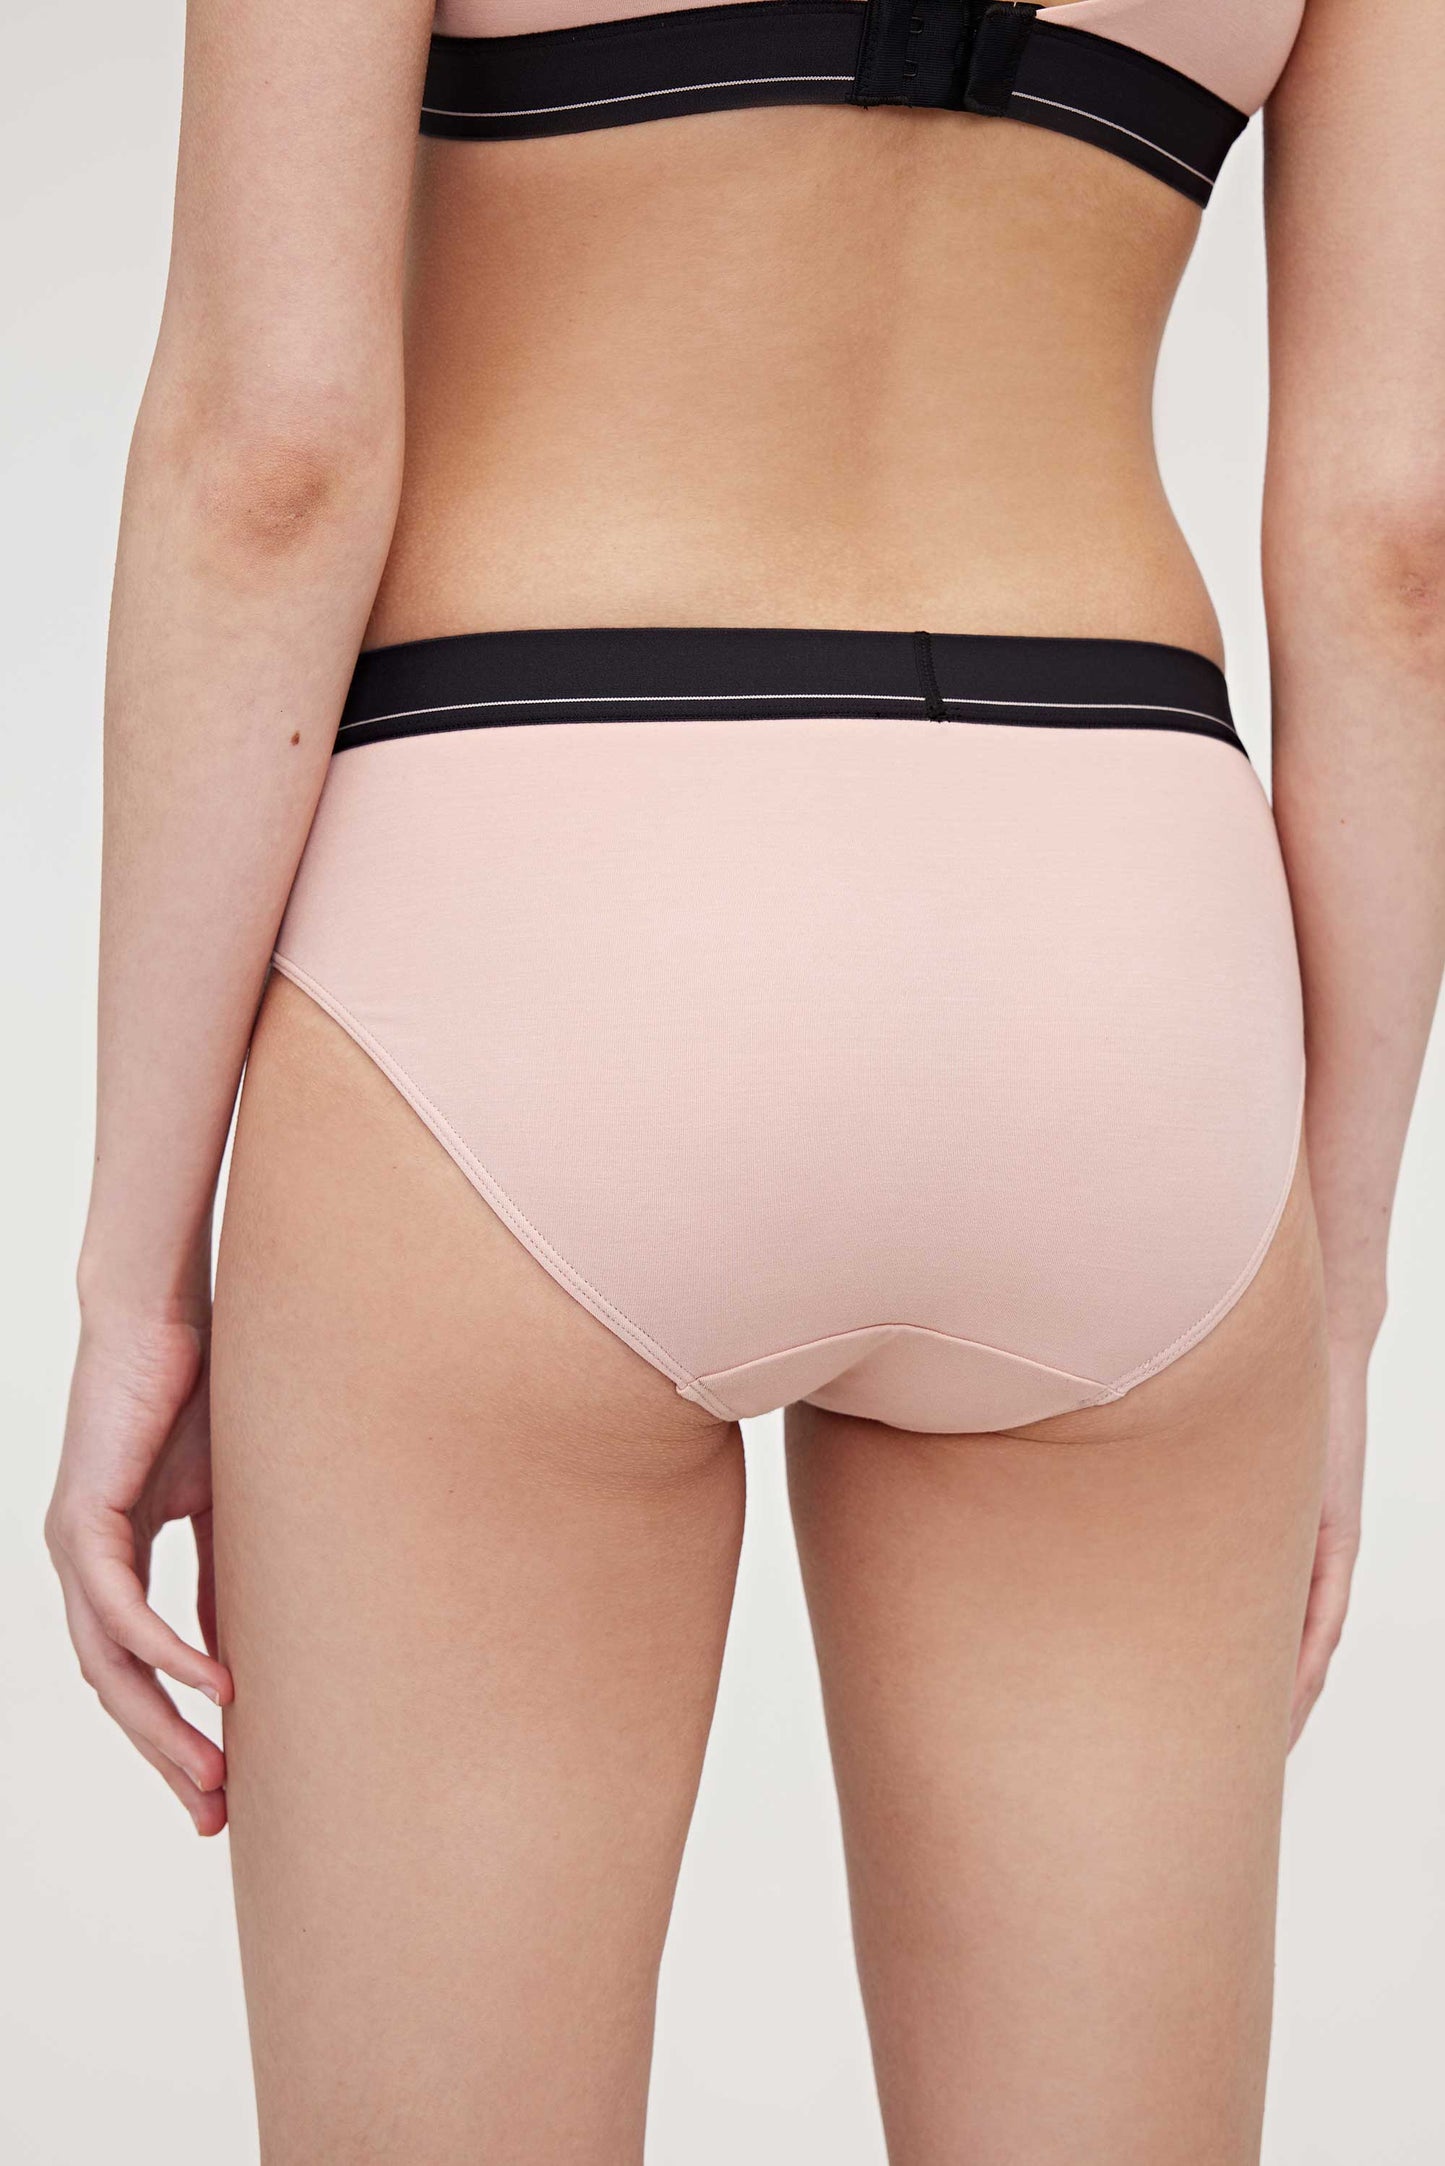 back of woman in pink brief